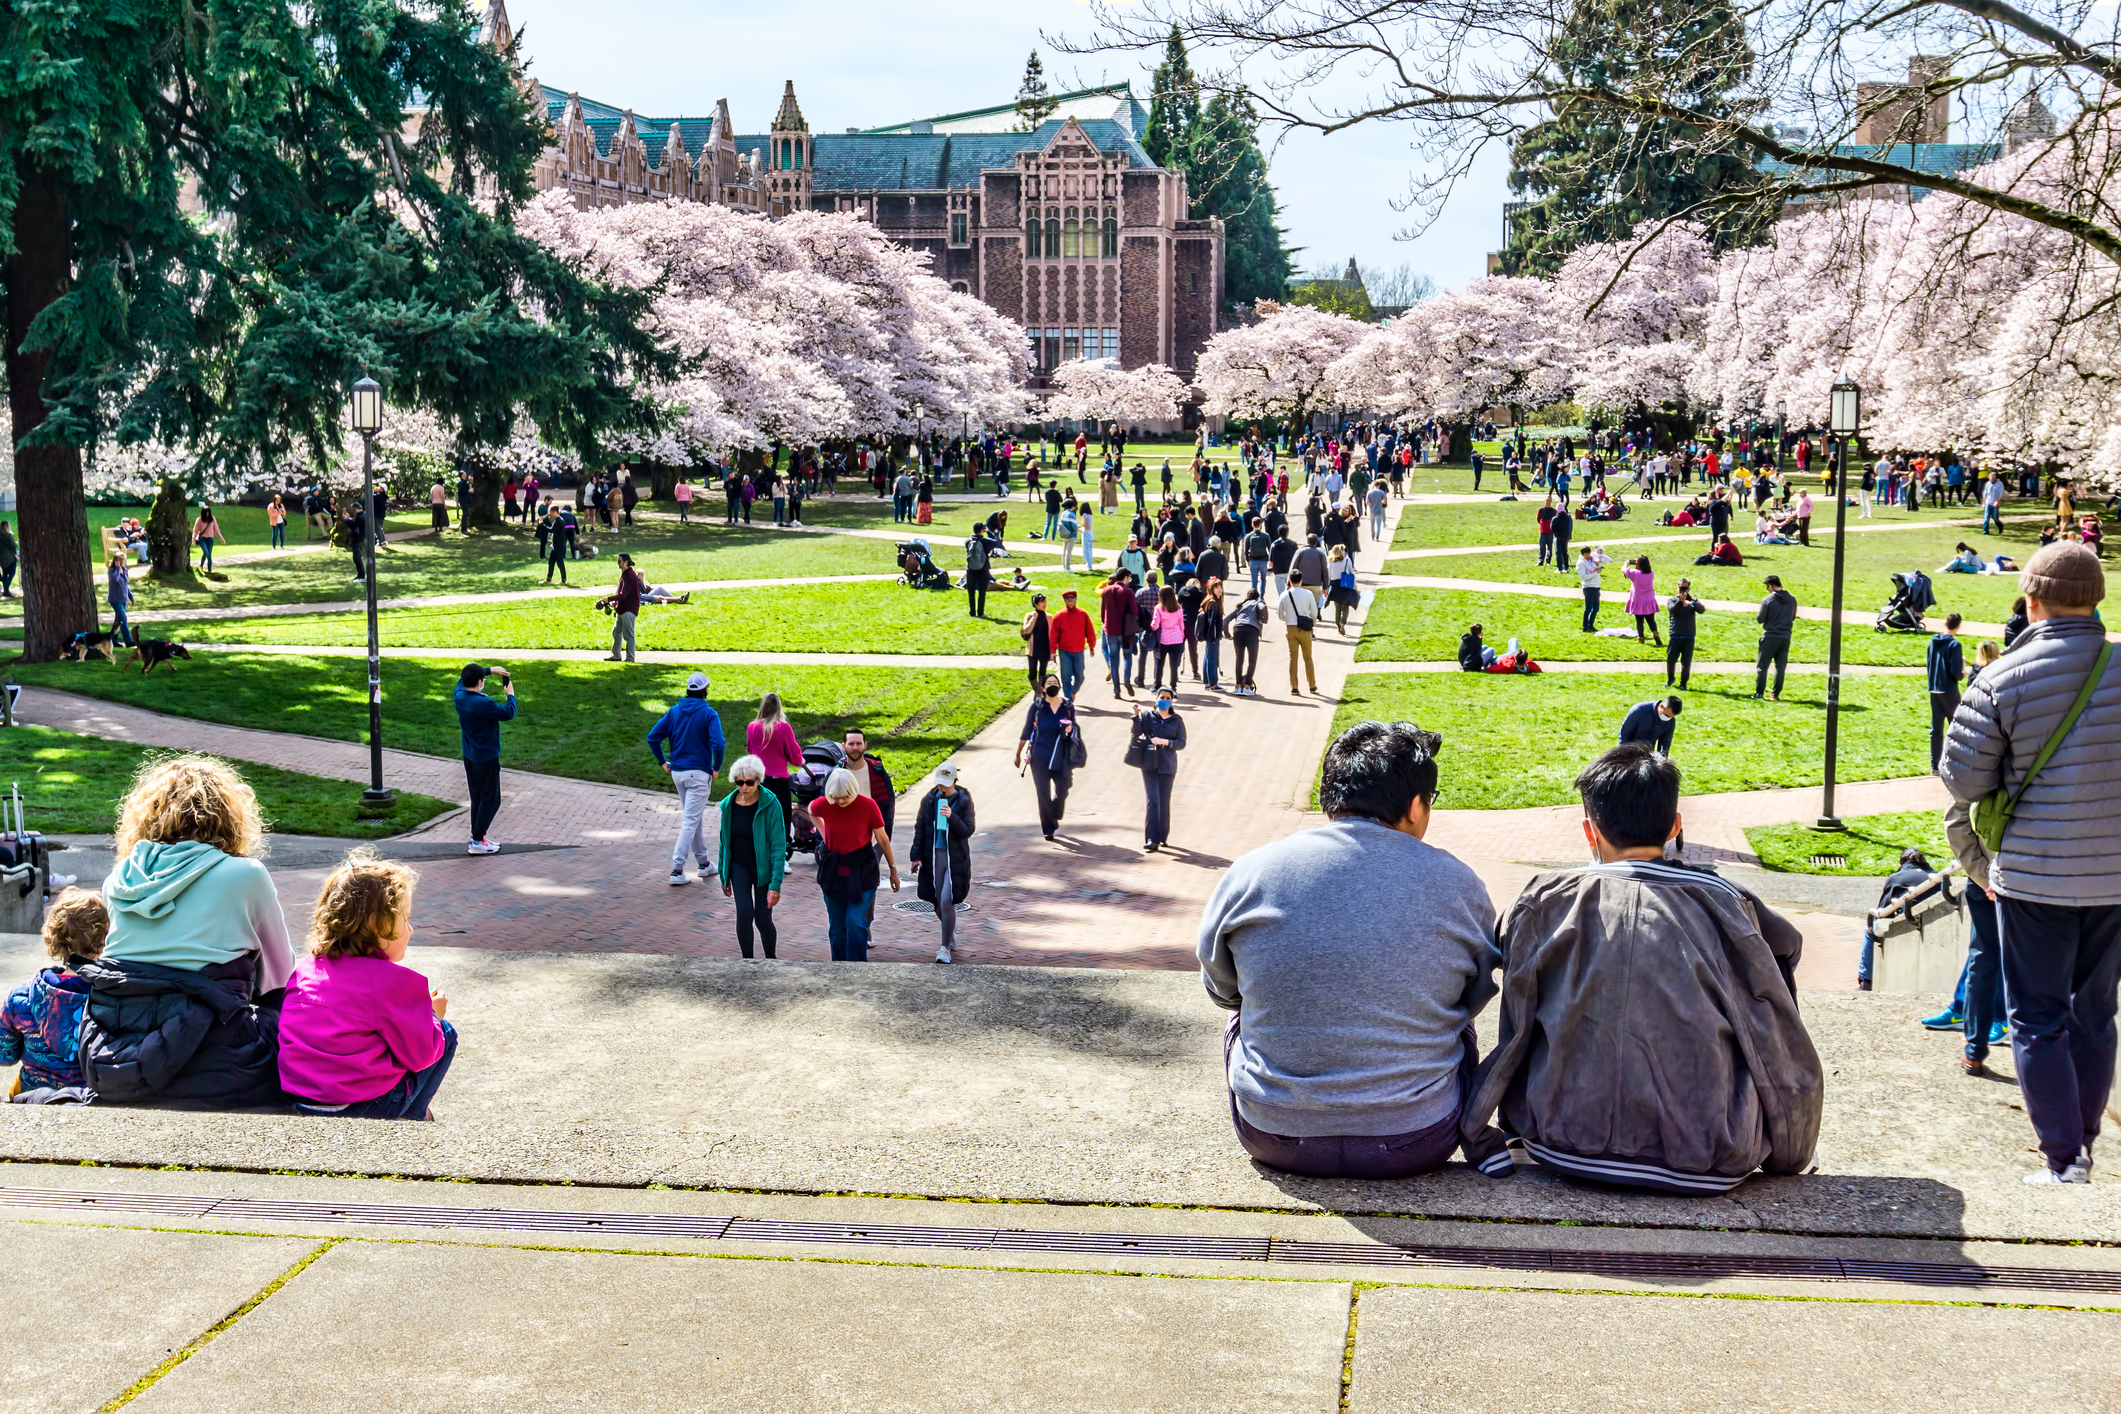 The University Of Washington quad reopens in time for the cherry blossom bloom in March.